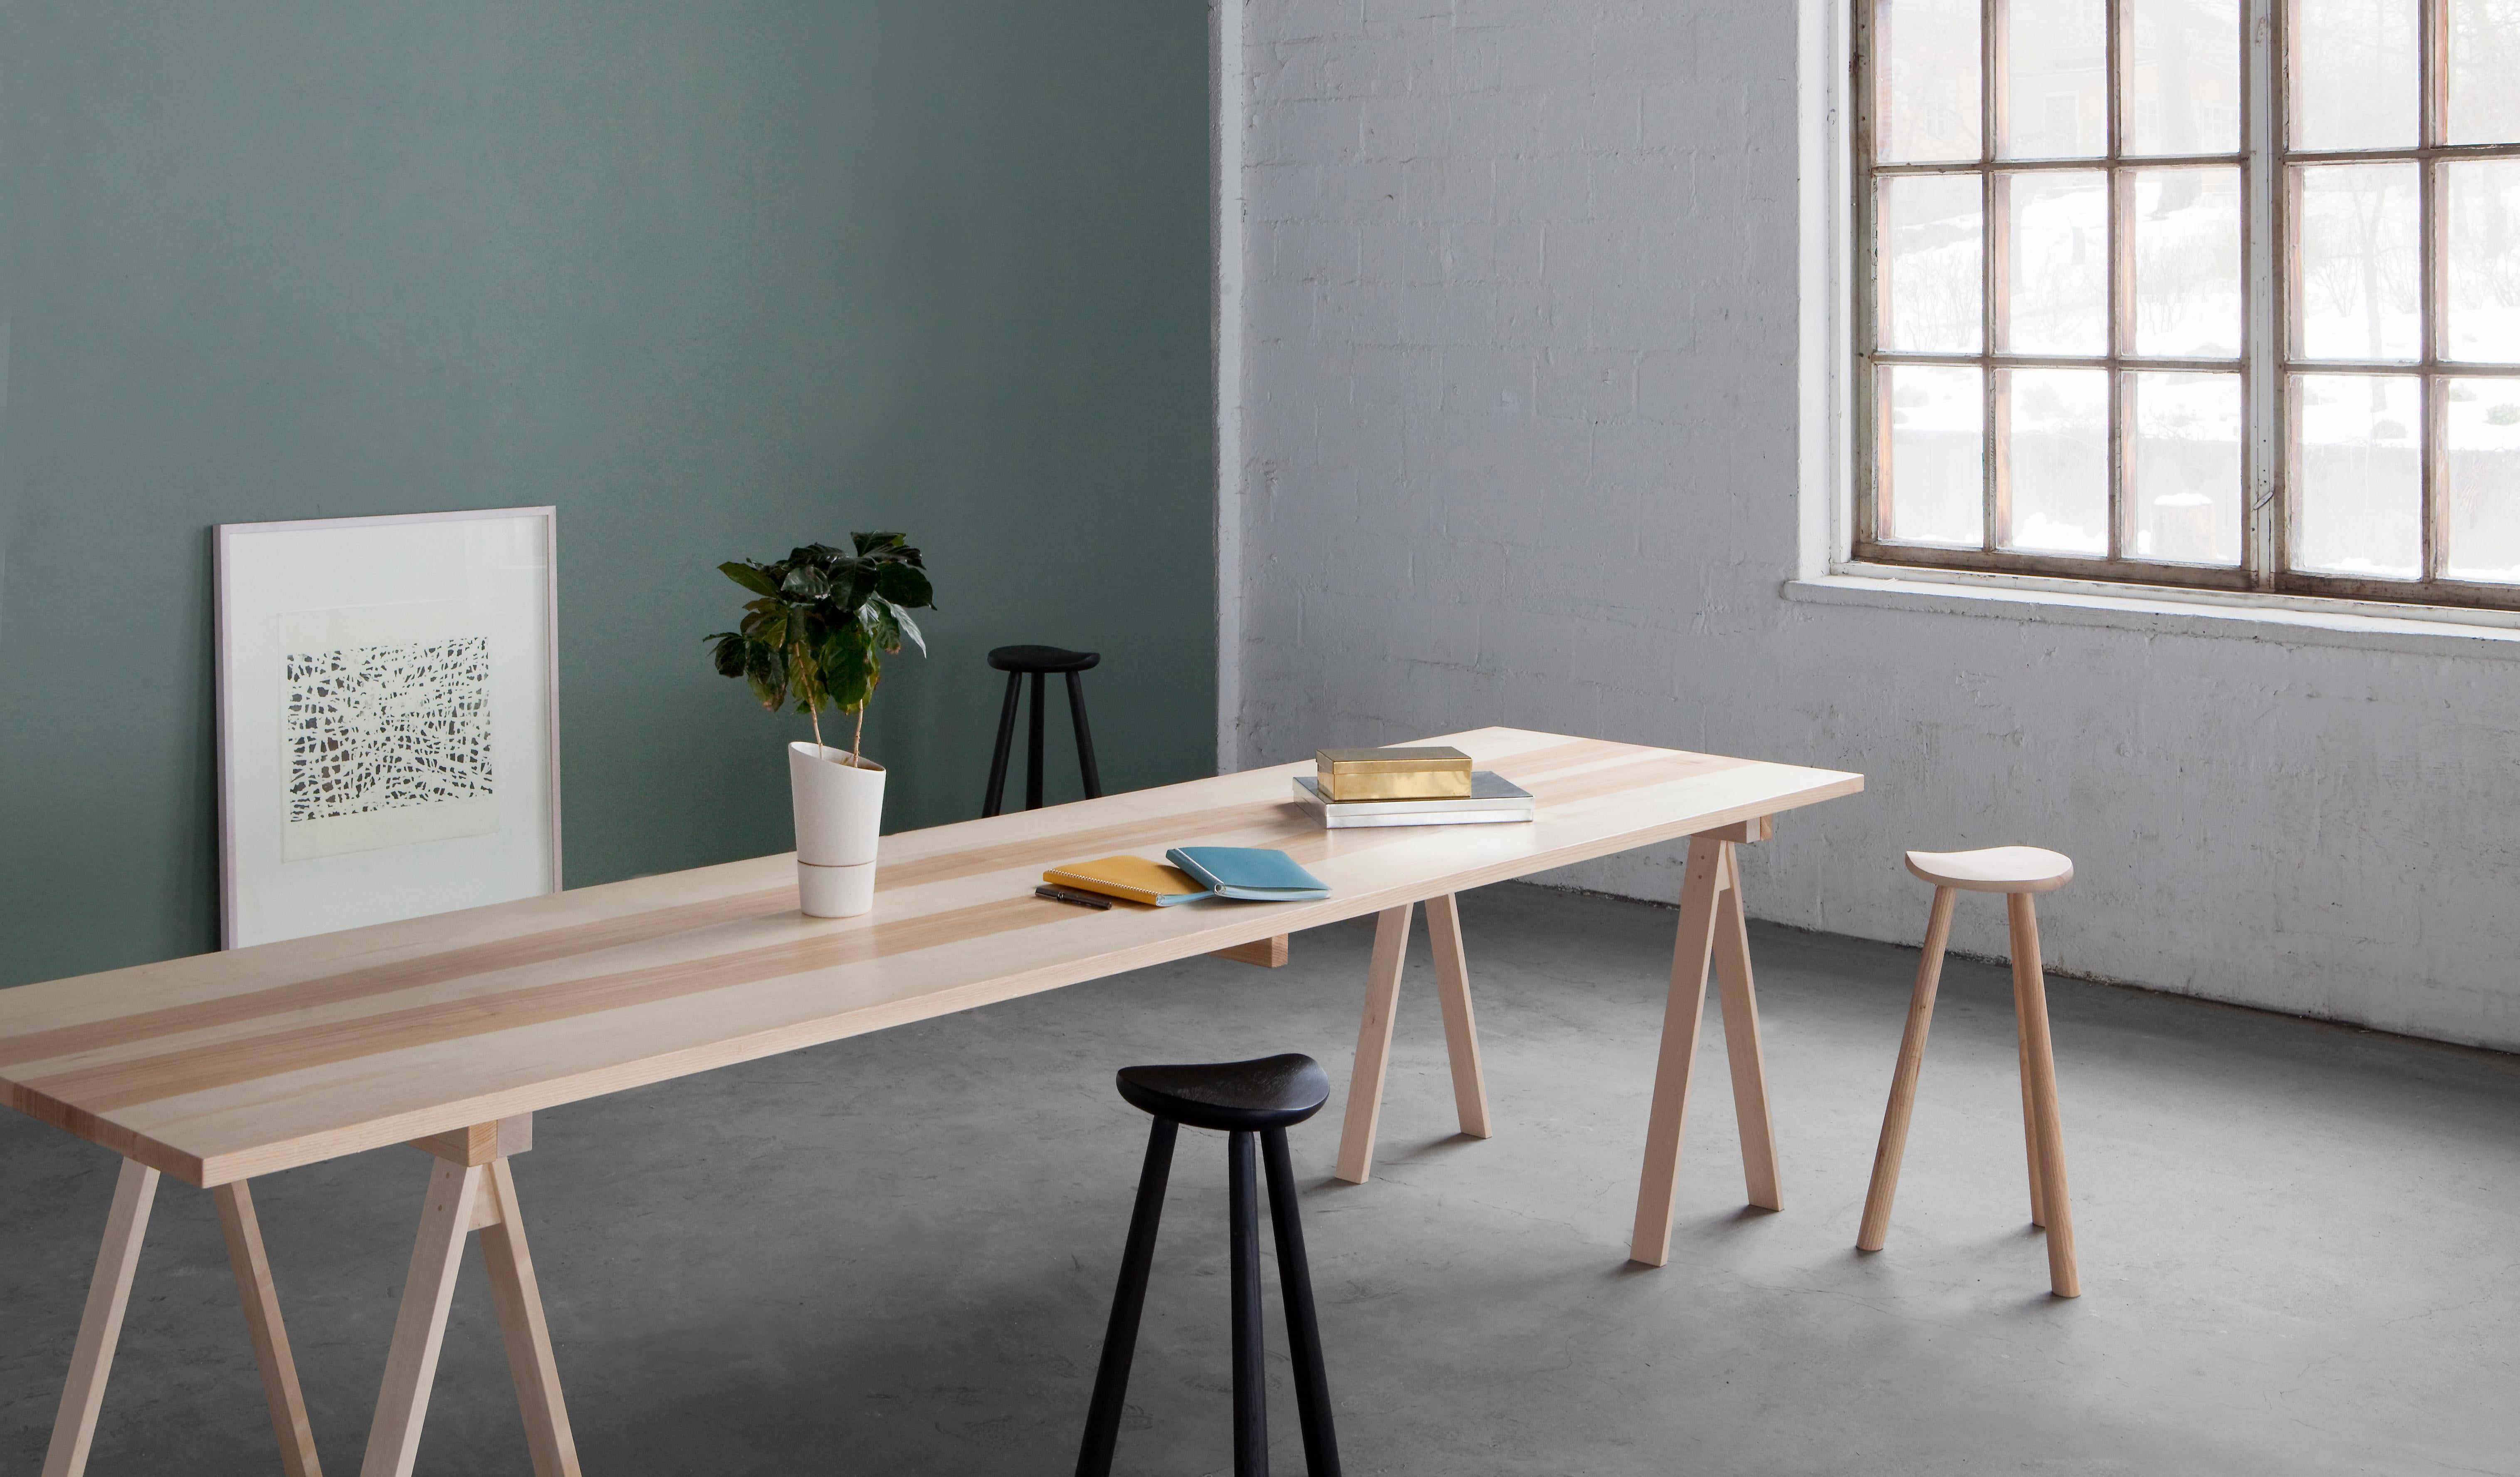 This solid wooden table top is meant to be used together with the Arkitecture PPJ trestle legs. Together they build up a practical, durable solid wooden table.

Materials
Birch, also in ash

Surface
Natural wood oil mix

Dimensions:
PPK2: 1800 x